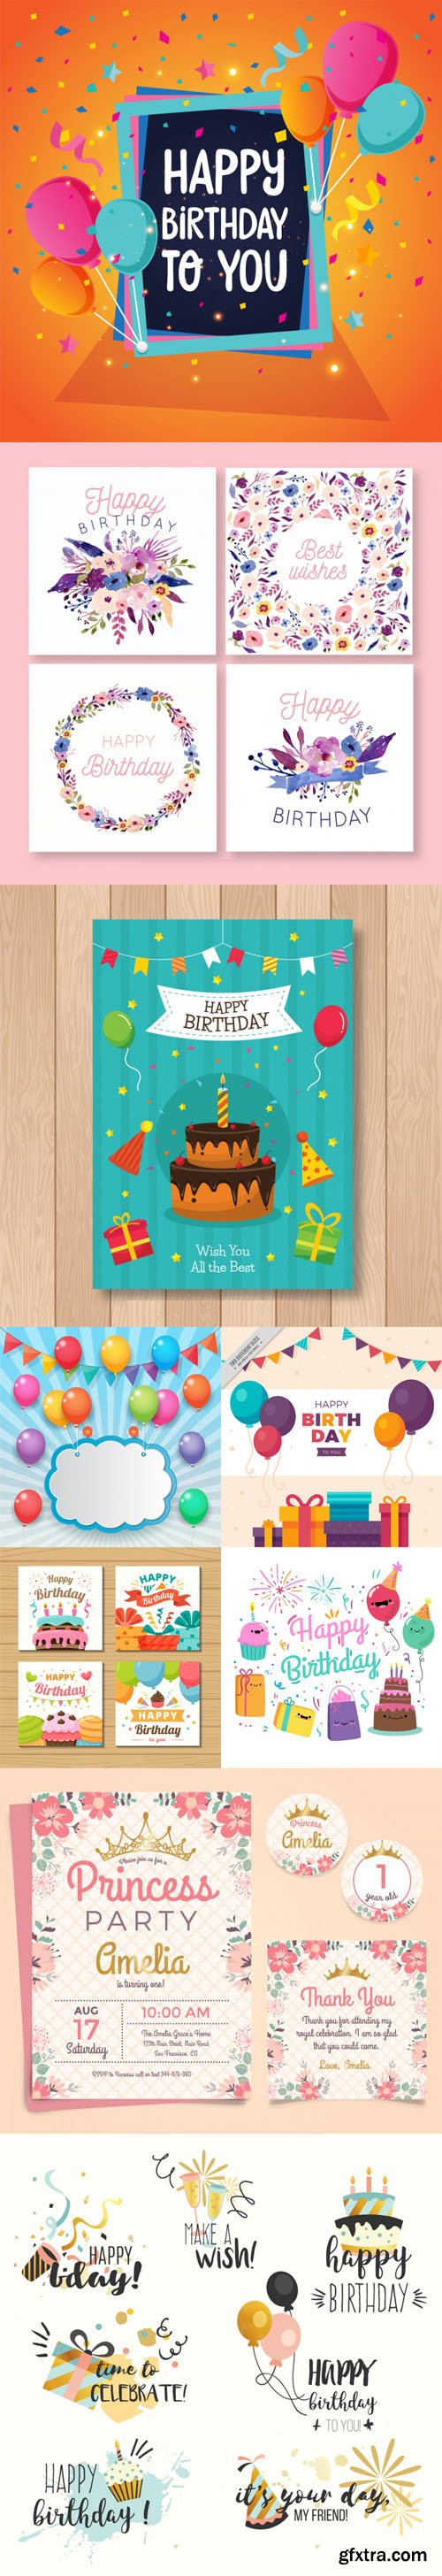 Collection of Happy Birthday Templates Design Vector